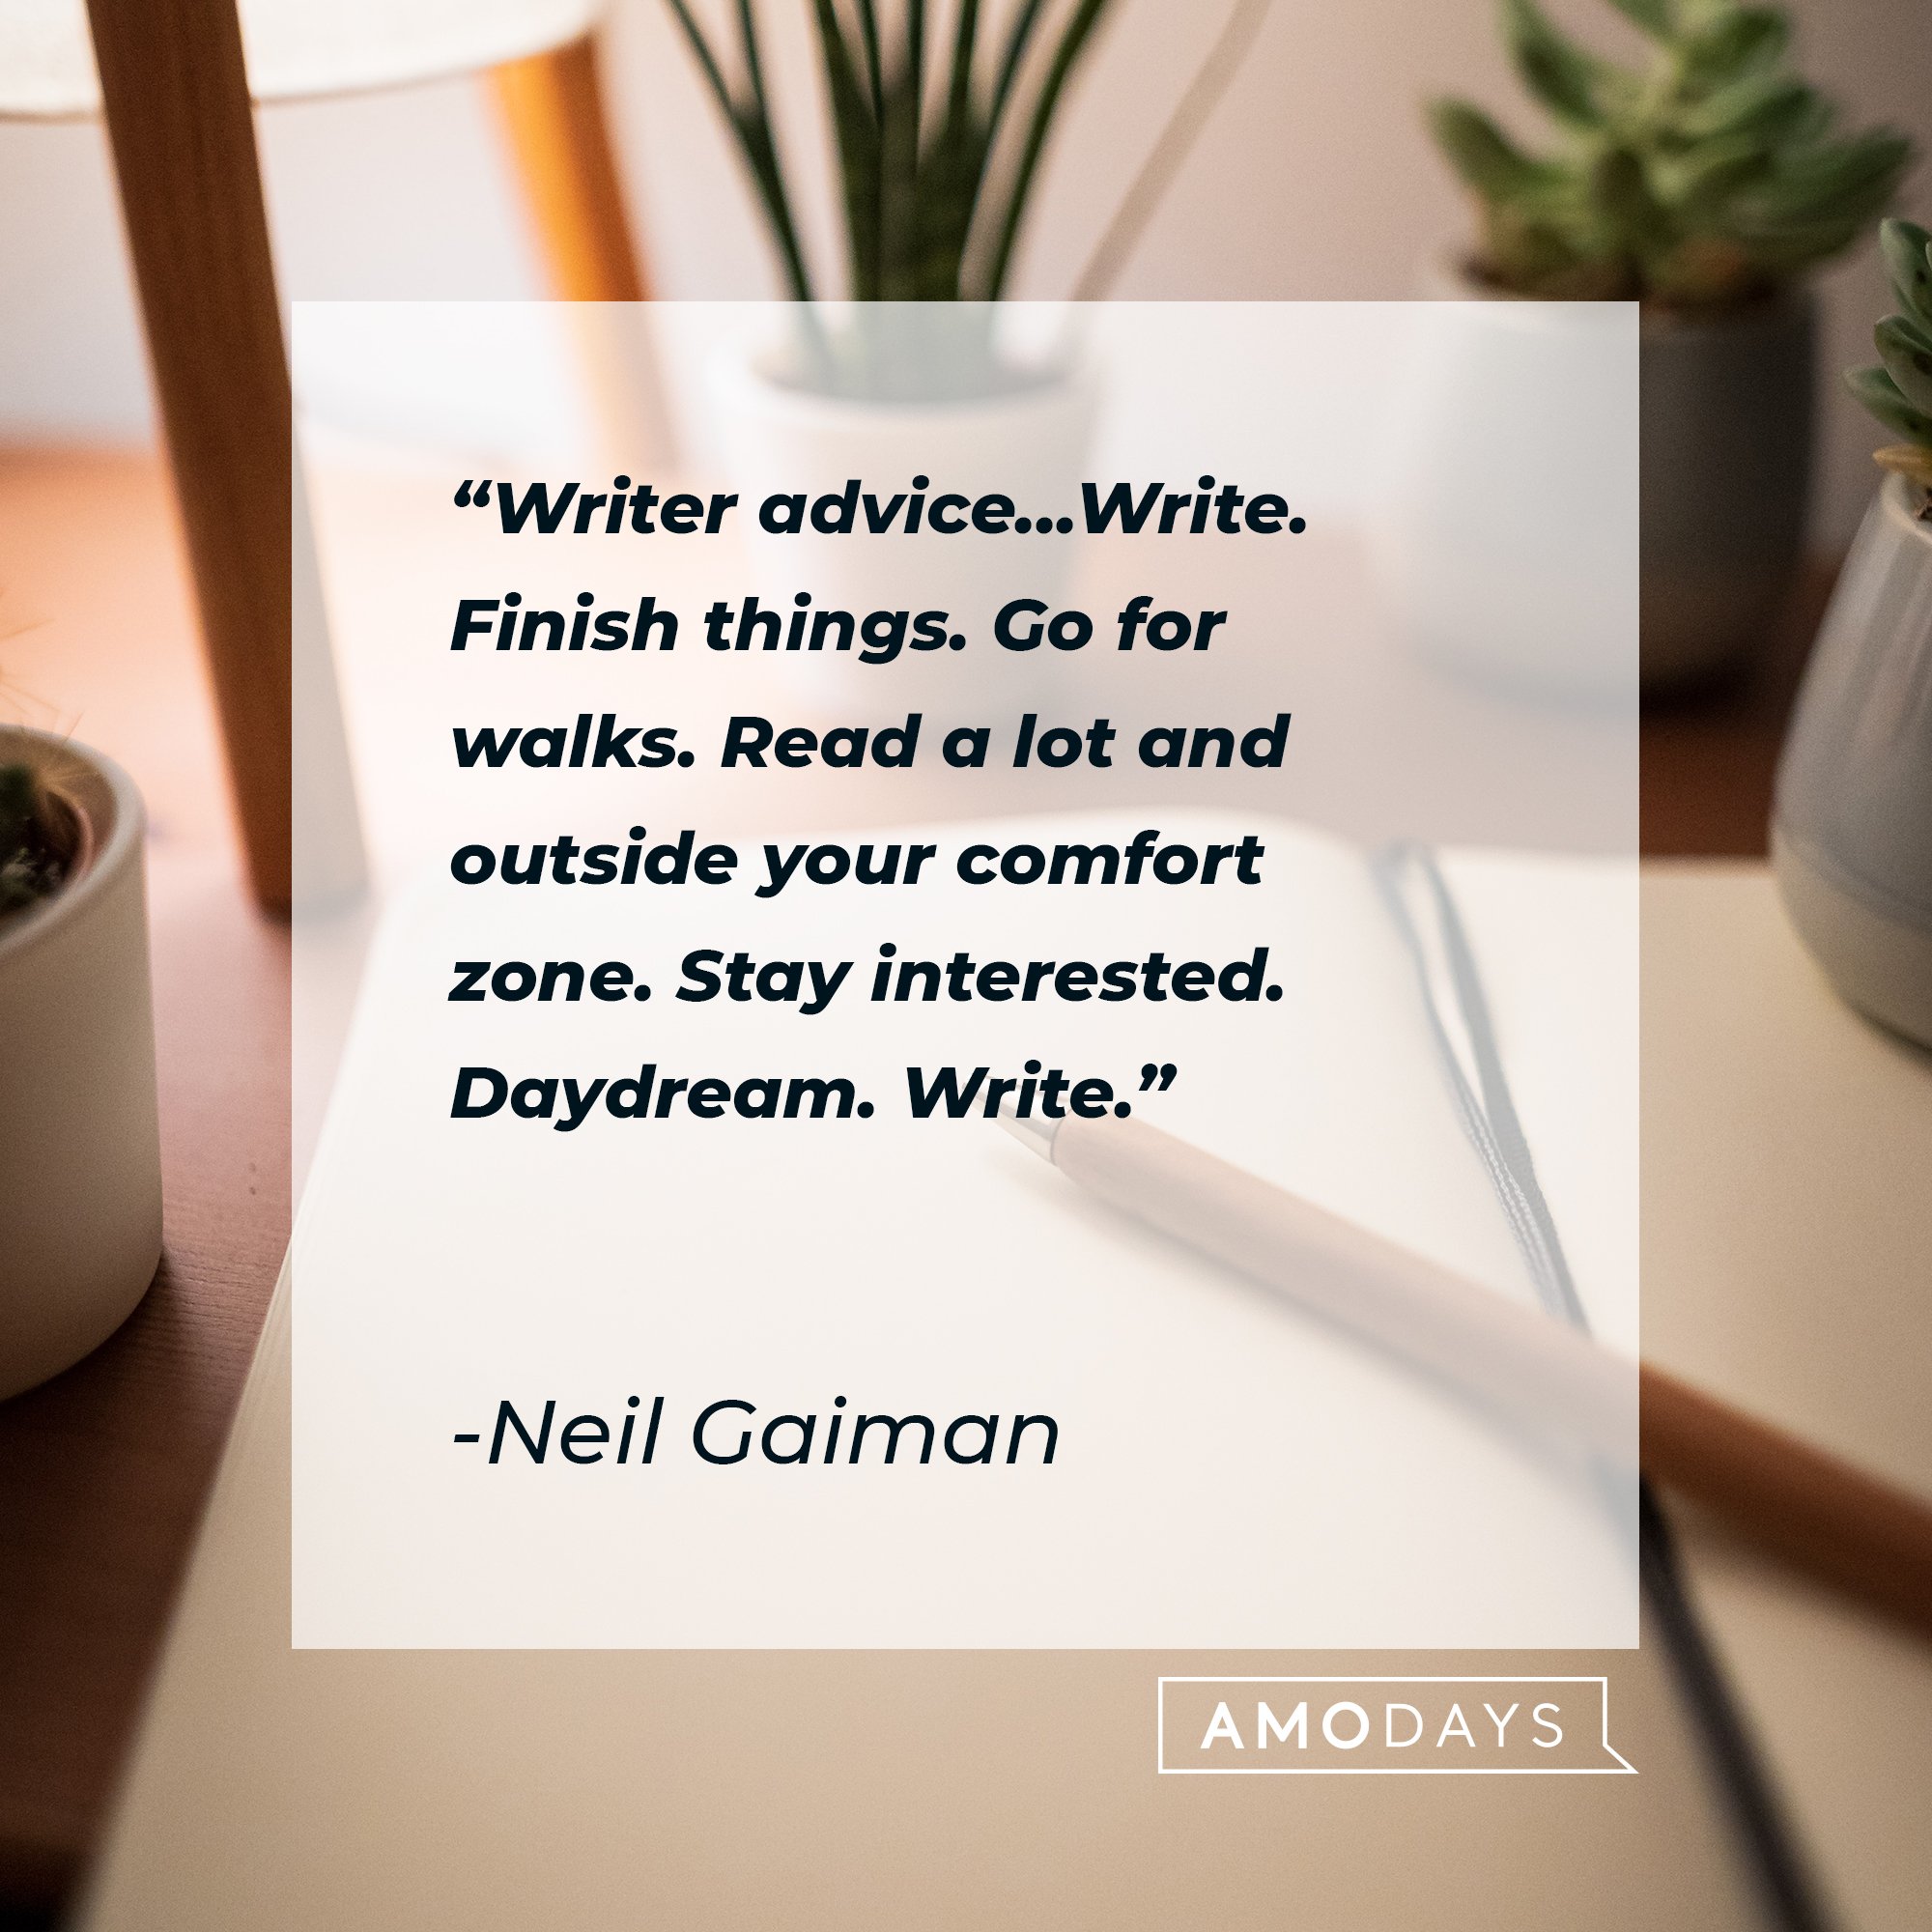 Neil Gaiman’s quote: "Writer advice...Write. Finish things. Go for walks. Read a lot and outside your comfort zone. Stay interested. Daydream. Write.” | Image: AmoDays